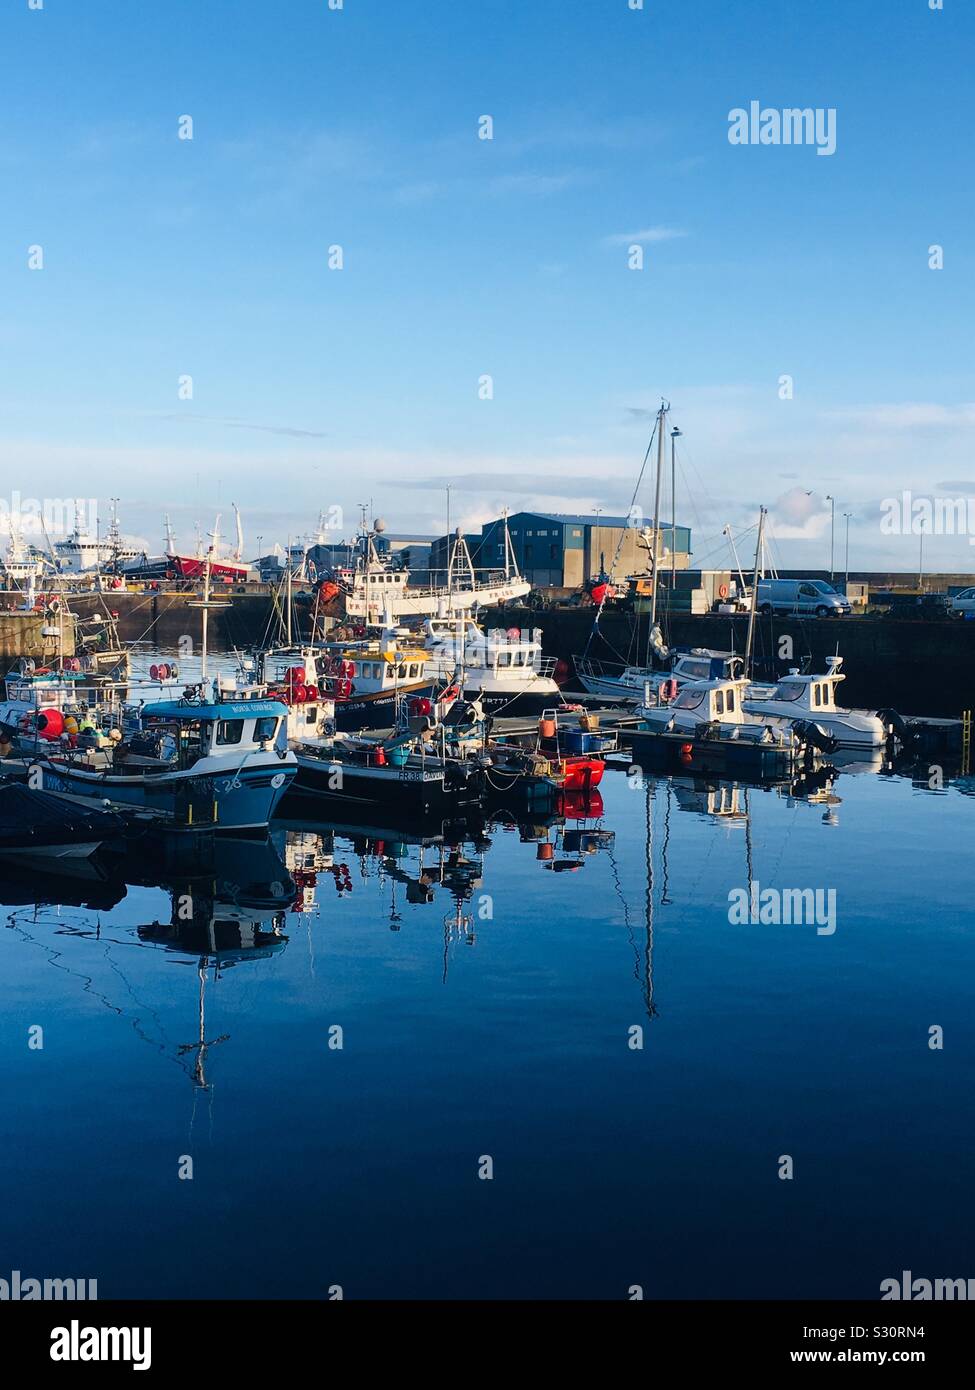 A line of Fishing Boats moored in Fraserburgh Harbour, Scotland Stock Photo